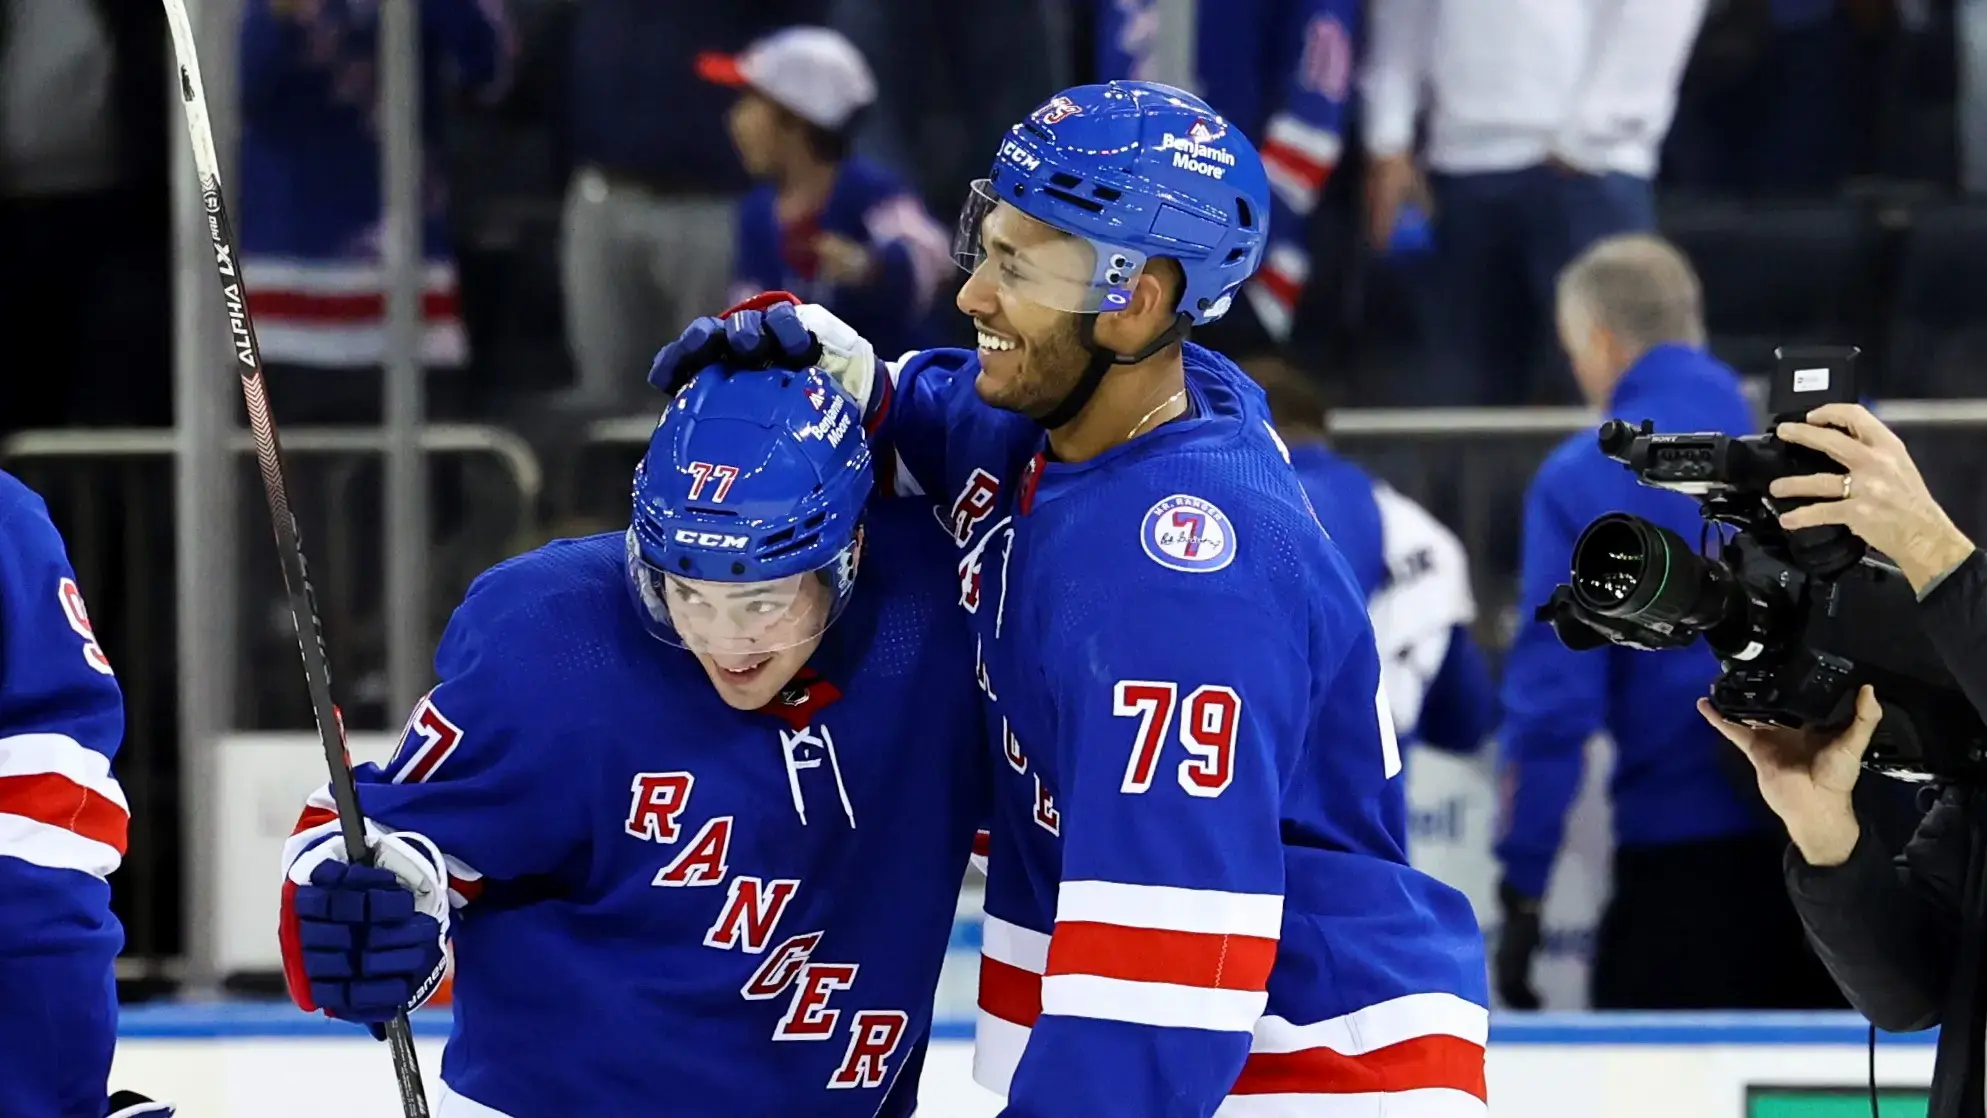 Mar 27, 2022; New York, New York, USA; New York Rangers center Frank Vatrano (77) and New York Rangers defenseman K'Andre Miller (79) embrace after winning the game against the Buffalo Sabres in overtime at Madison Square Garden. Mandatory Credit: Jessica Alcheh-USA TODAY Sports / Jessica Alcheh-USA TODAY Sports